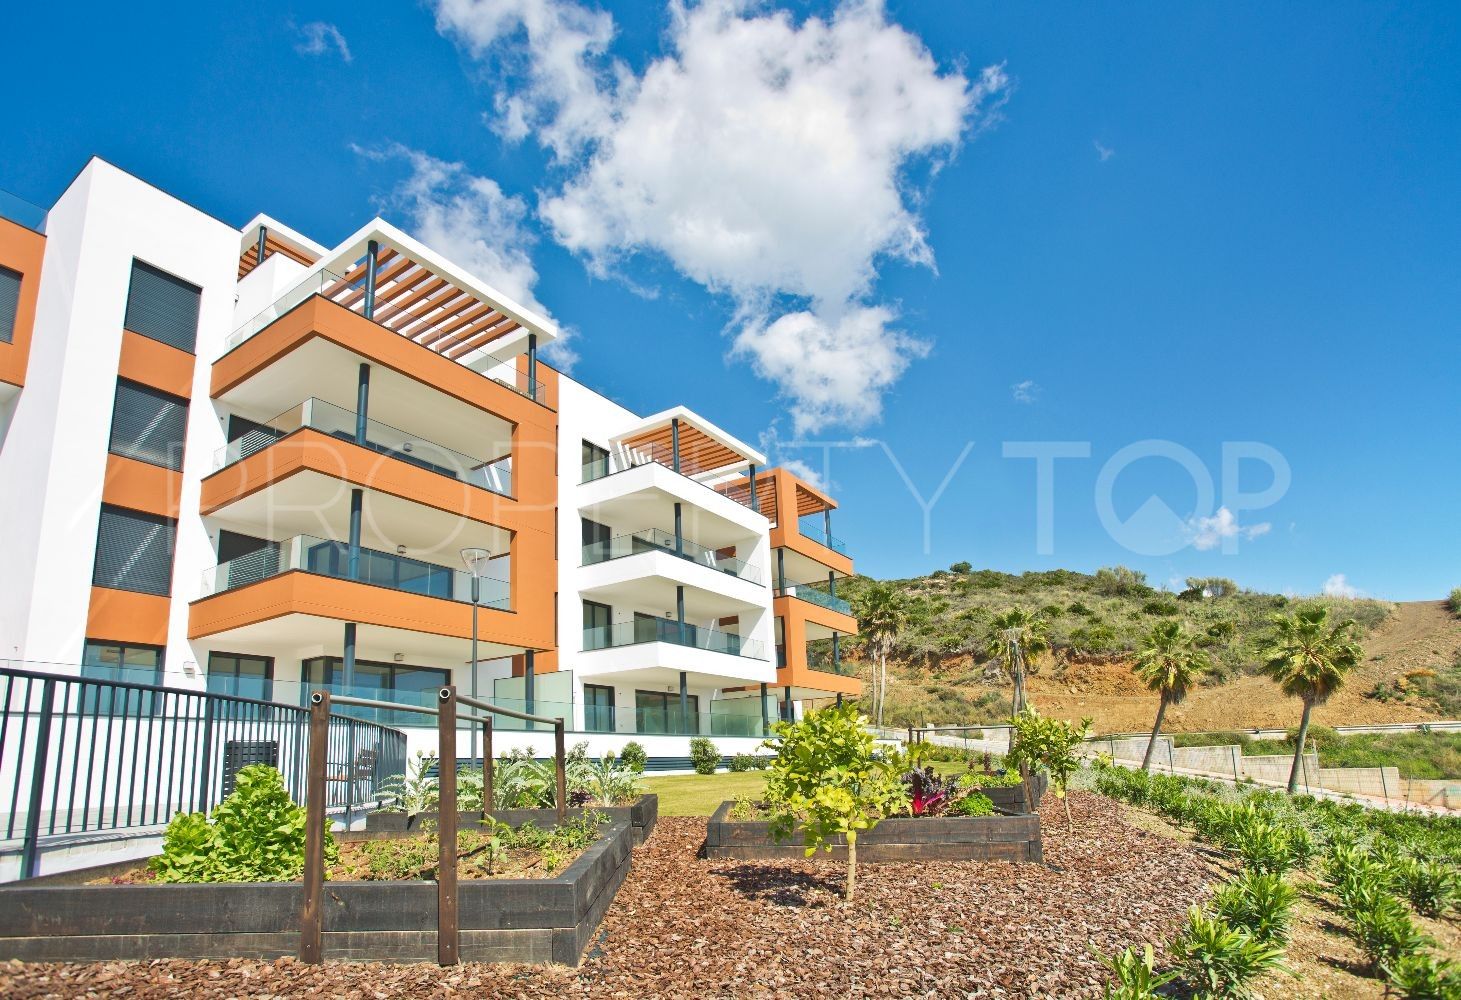 For sale apartment in Fuengirola with 2 bedrooms